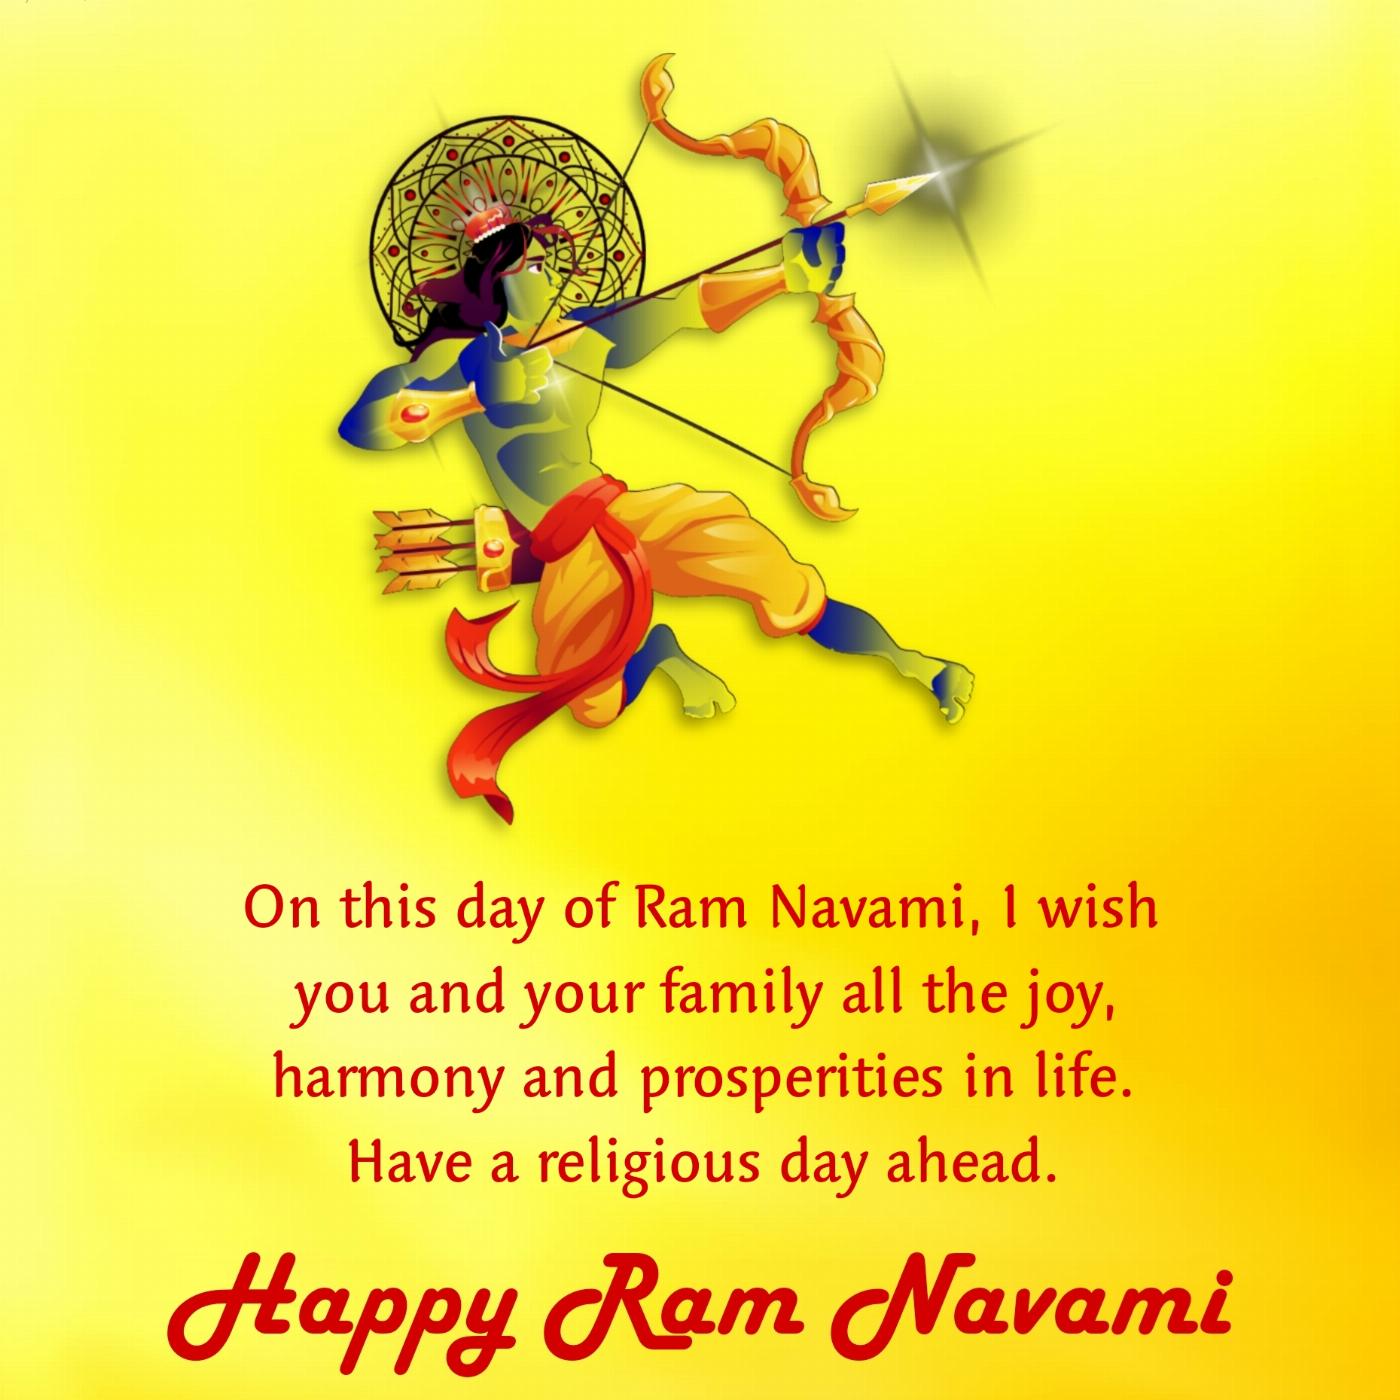 On this day of Ram Navami I wish you and your family